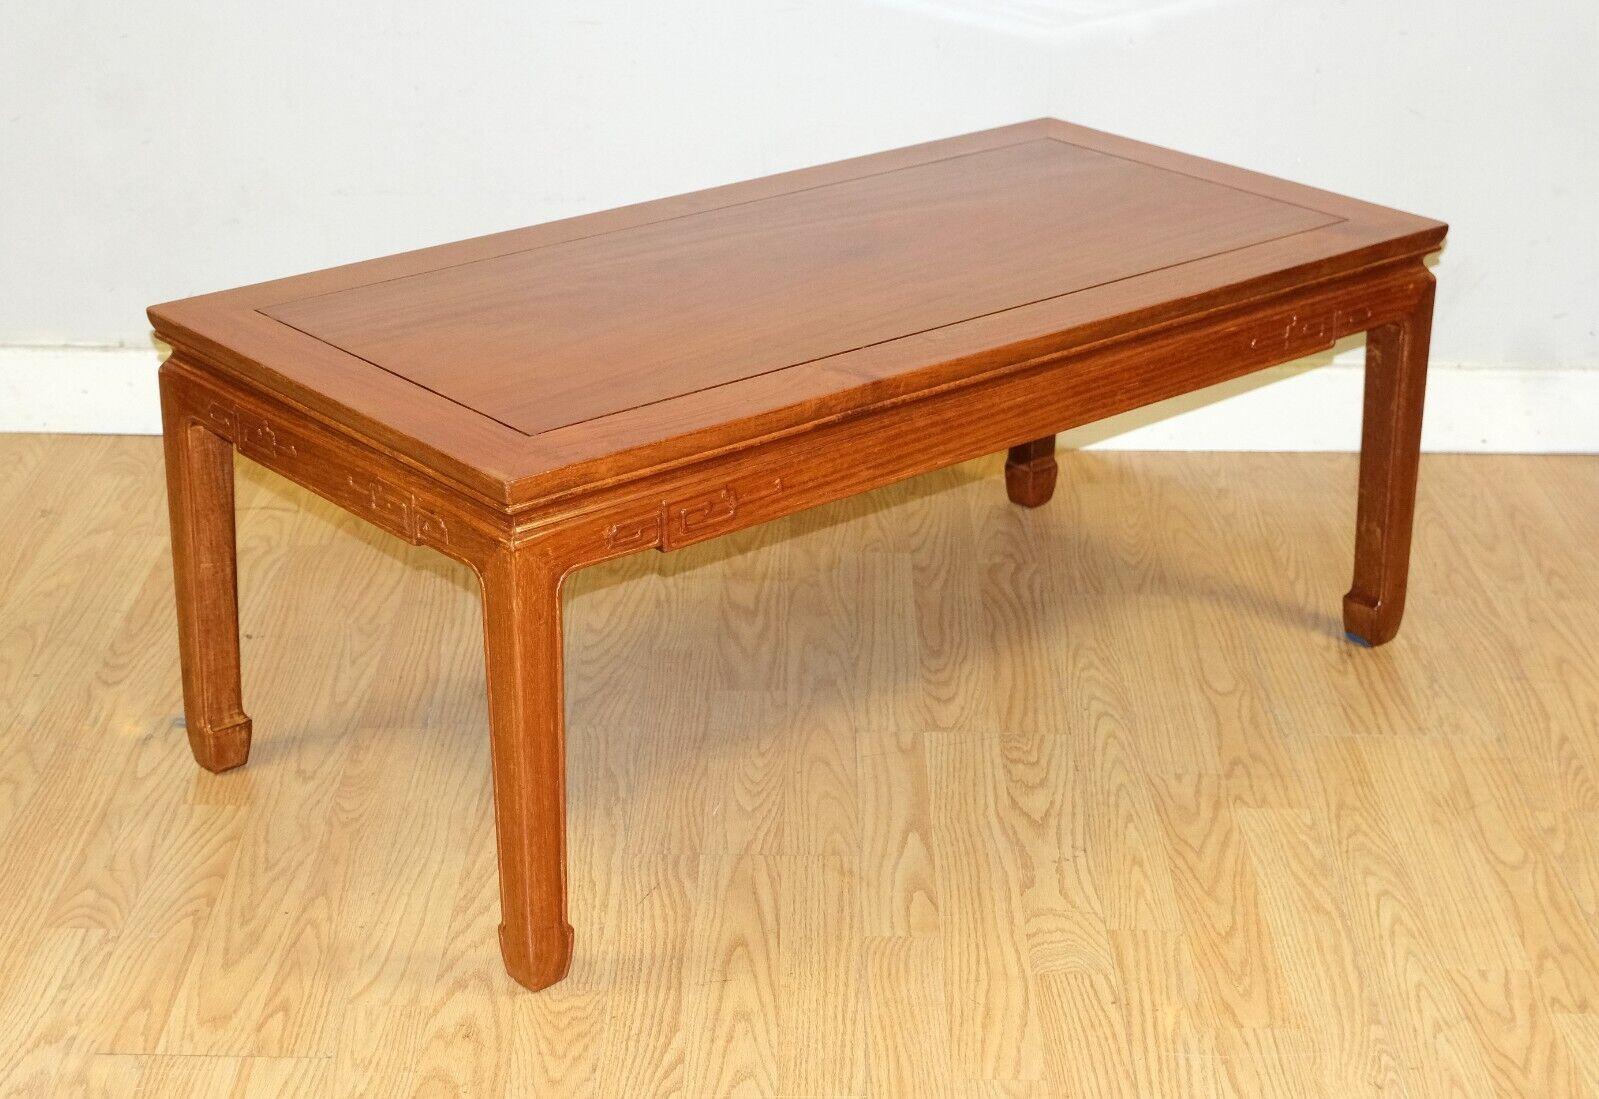 We are delighted to offer for sale this lovely Chinese rosewood coffee table on hoof feet and hand carved details around. 

This well made, simple but elegant coffee table is a great addition to your living room. The item is presented with hand